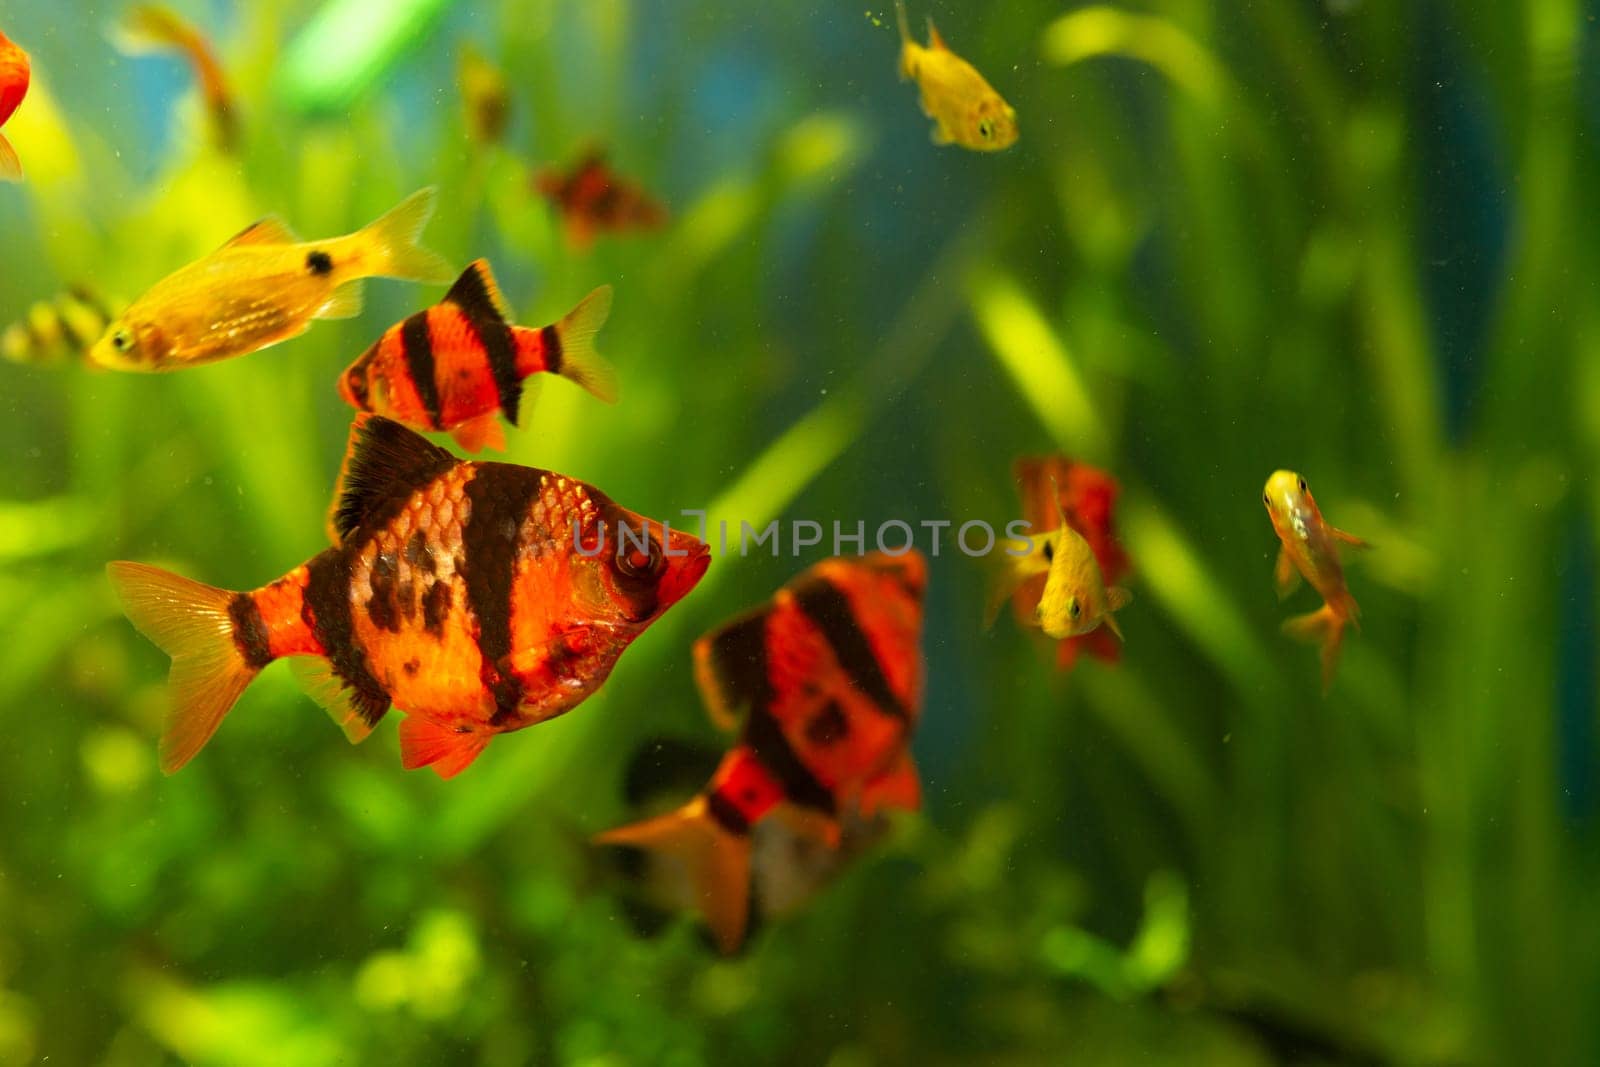 A colorful community of small tropical fish in a planted aquarium tank with green plants and a blue background.